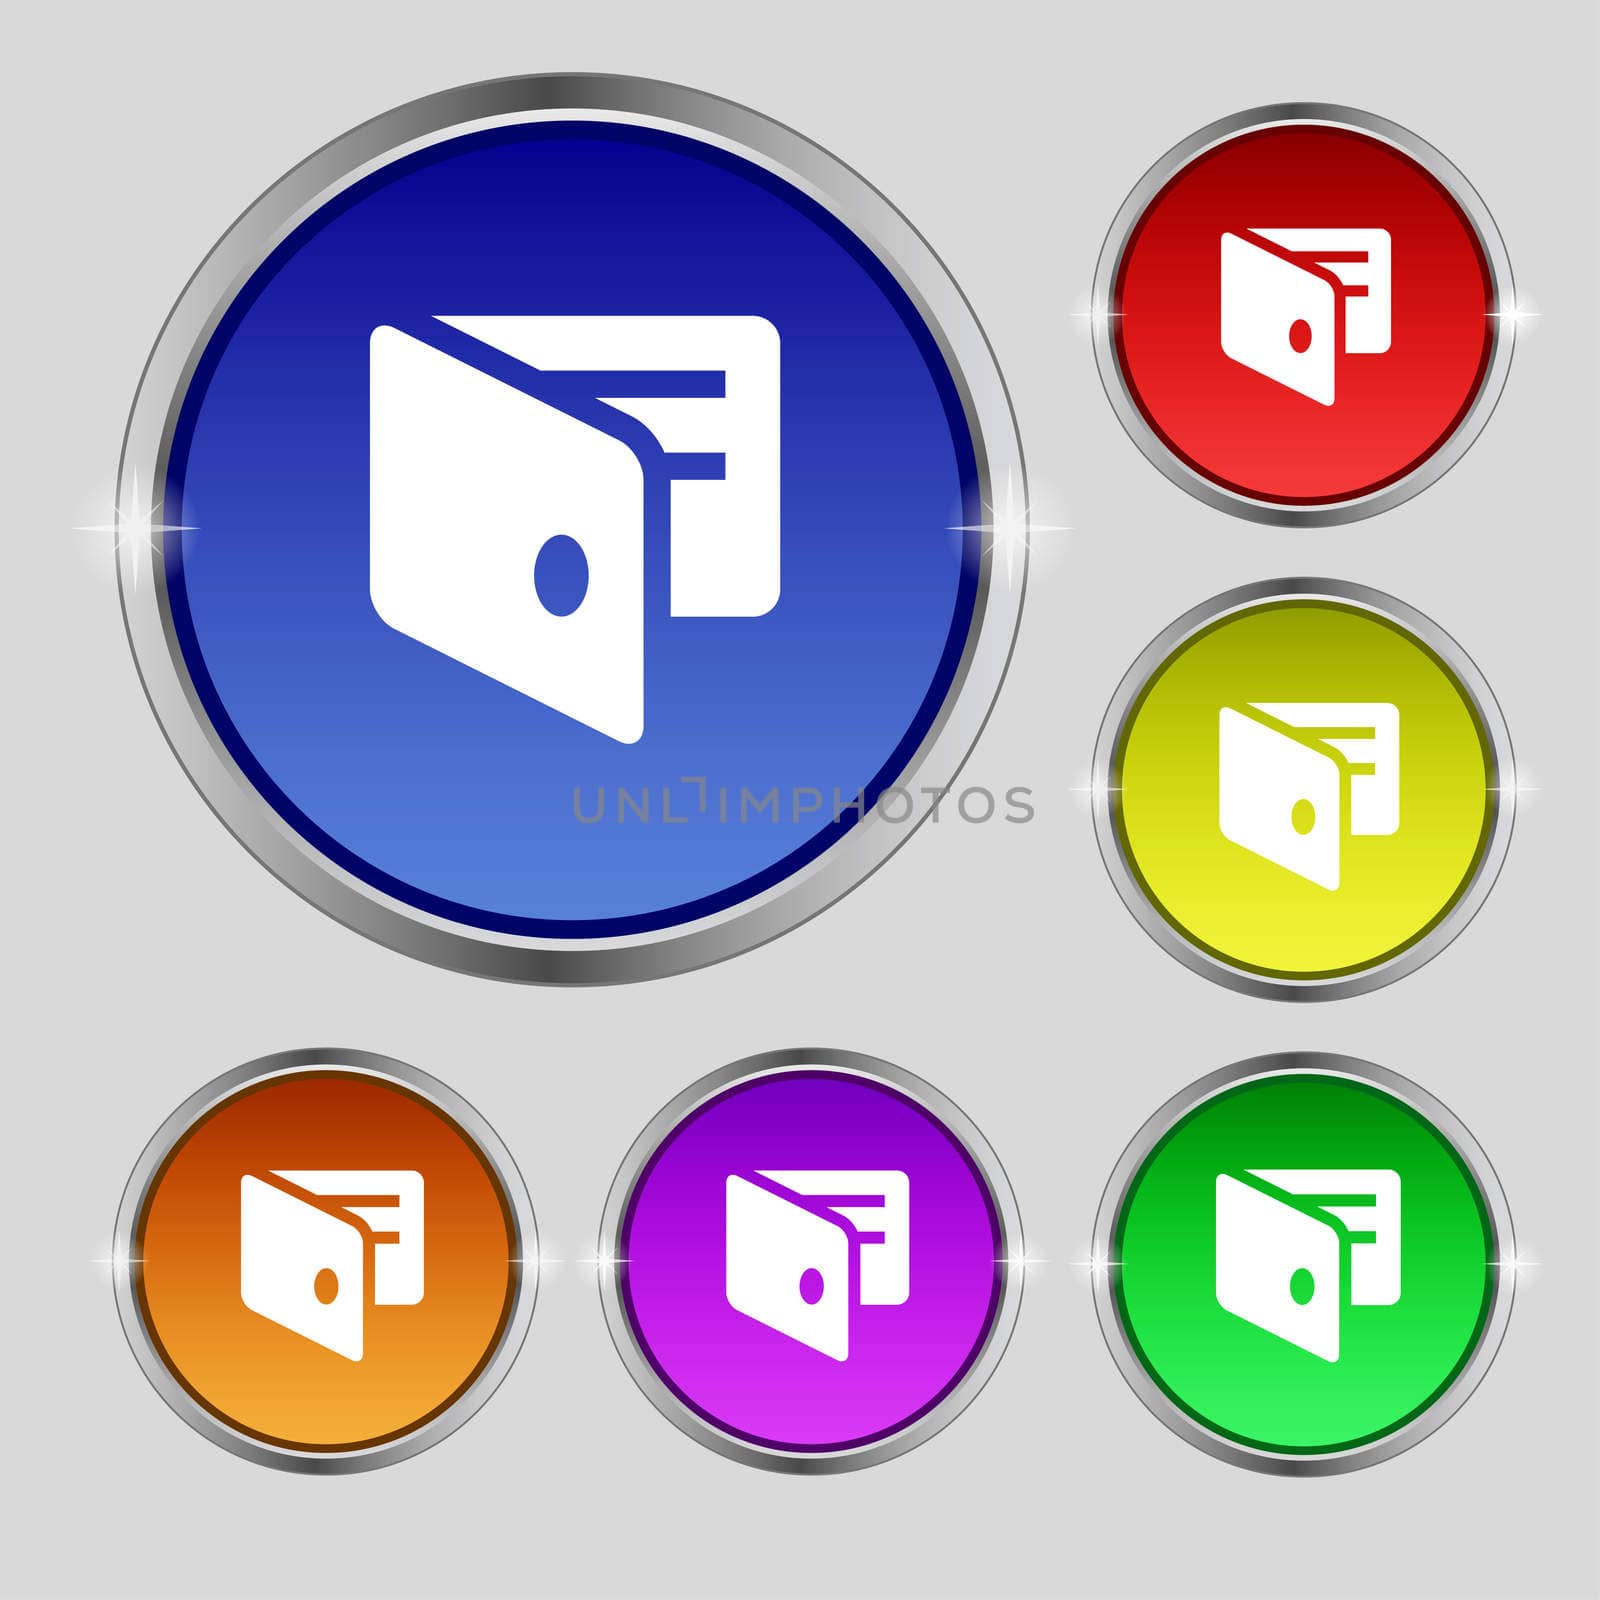 eWallet, Electronic wallet, Business Card Holder icon sign. Round symbol on bright colourful buttons. illustration